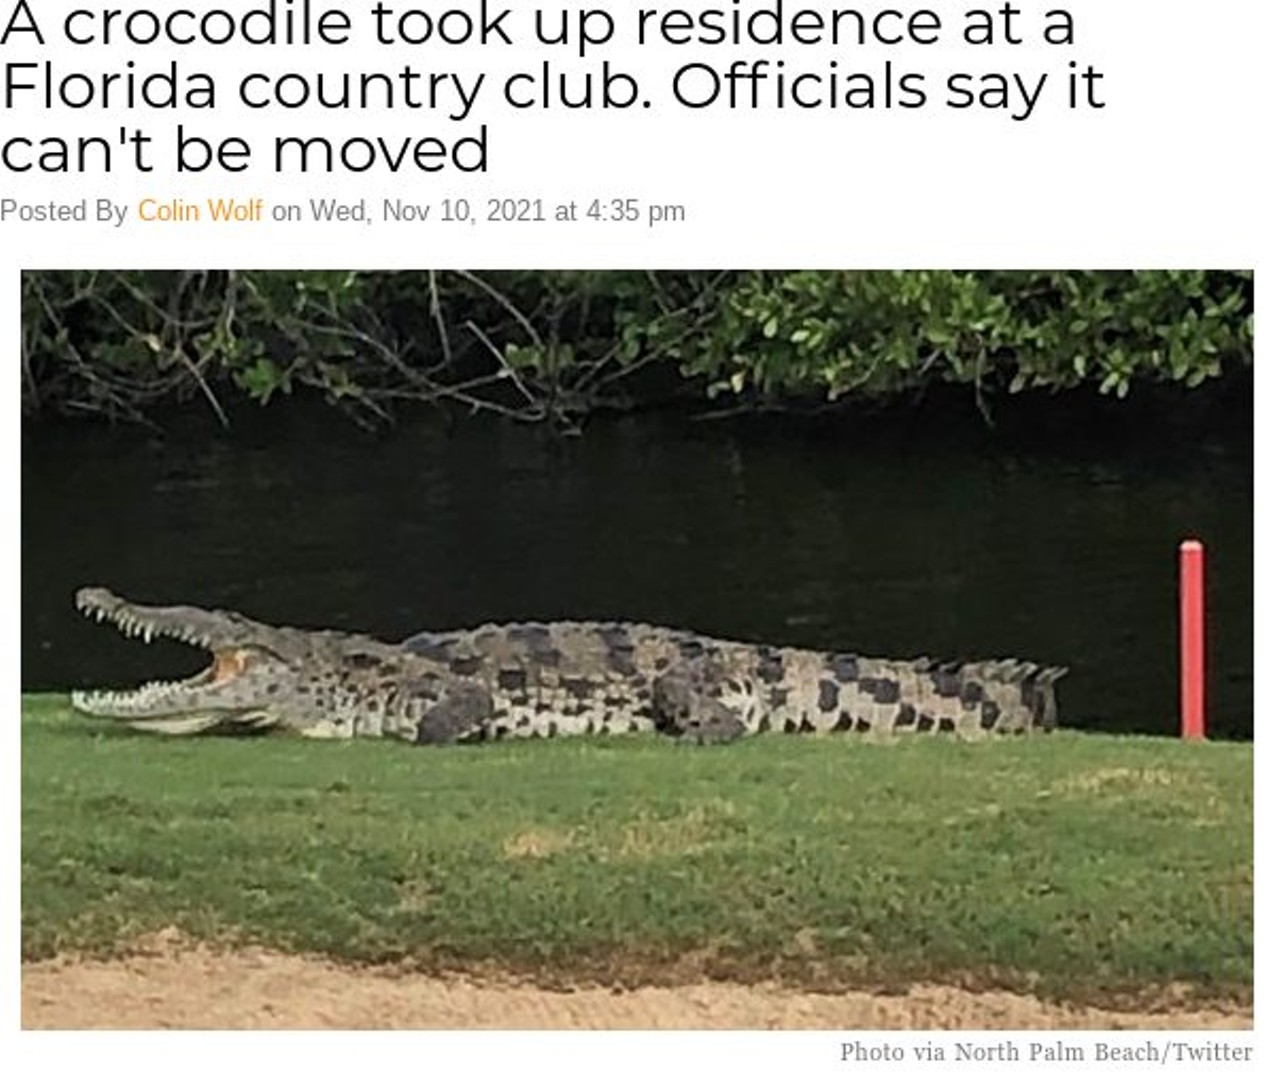 A crocodile took up residence at a Florida country club. Officials say it can't be moved
